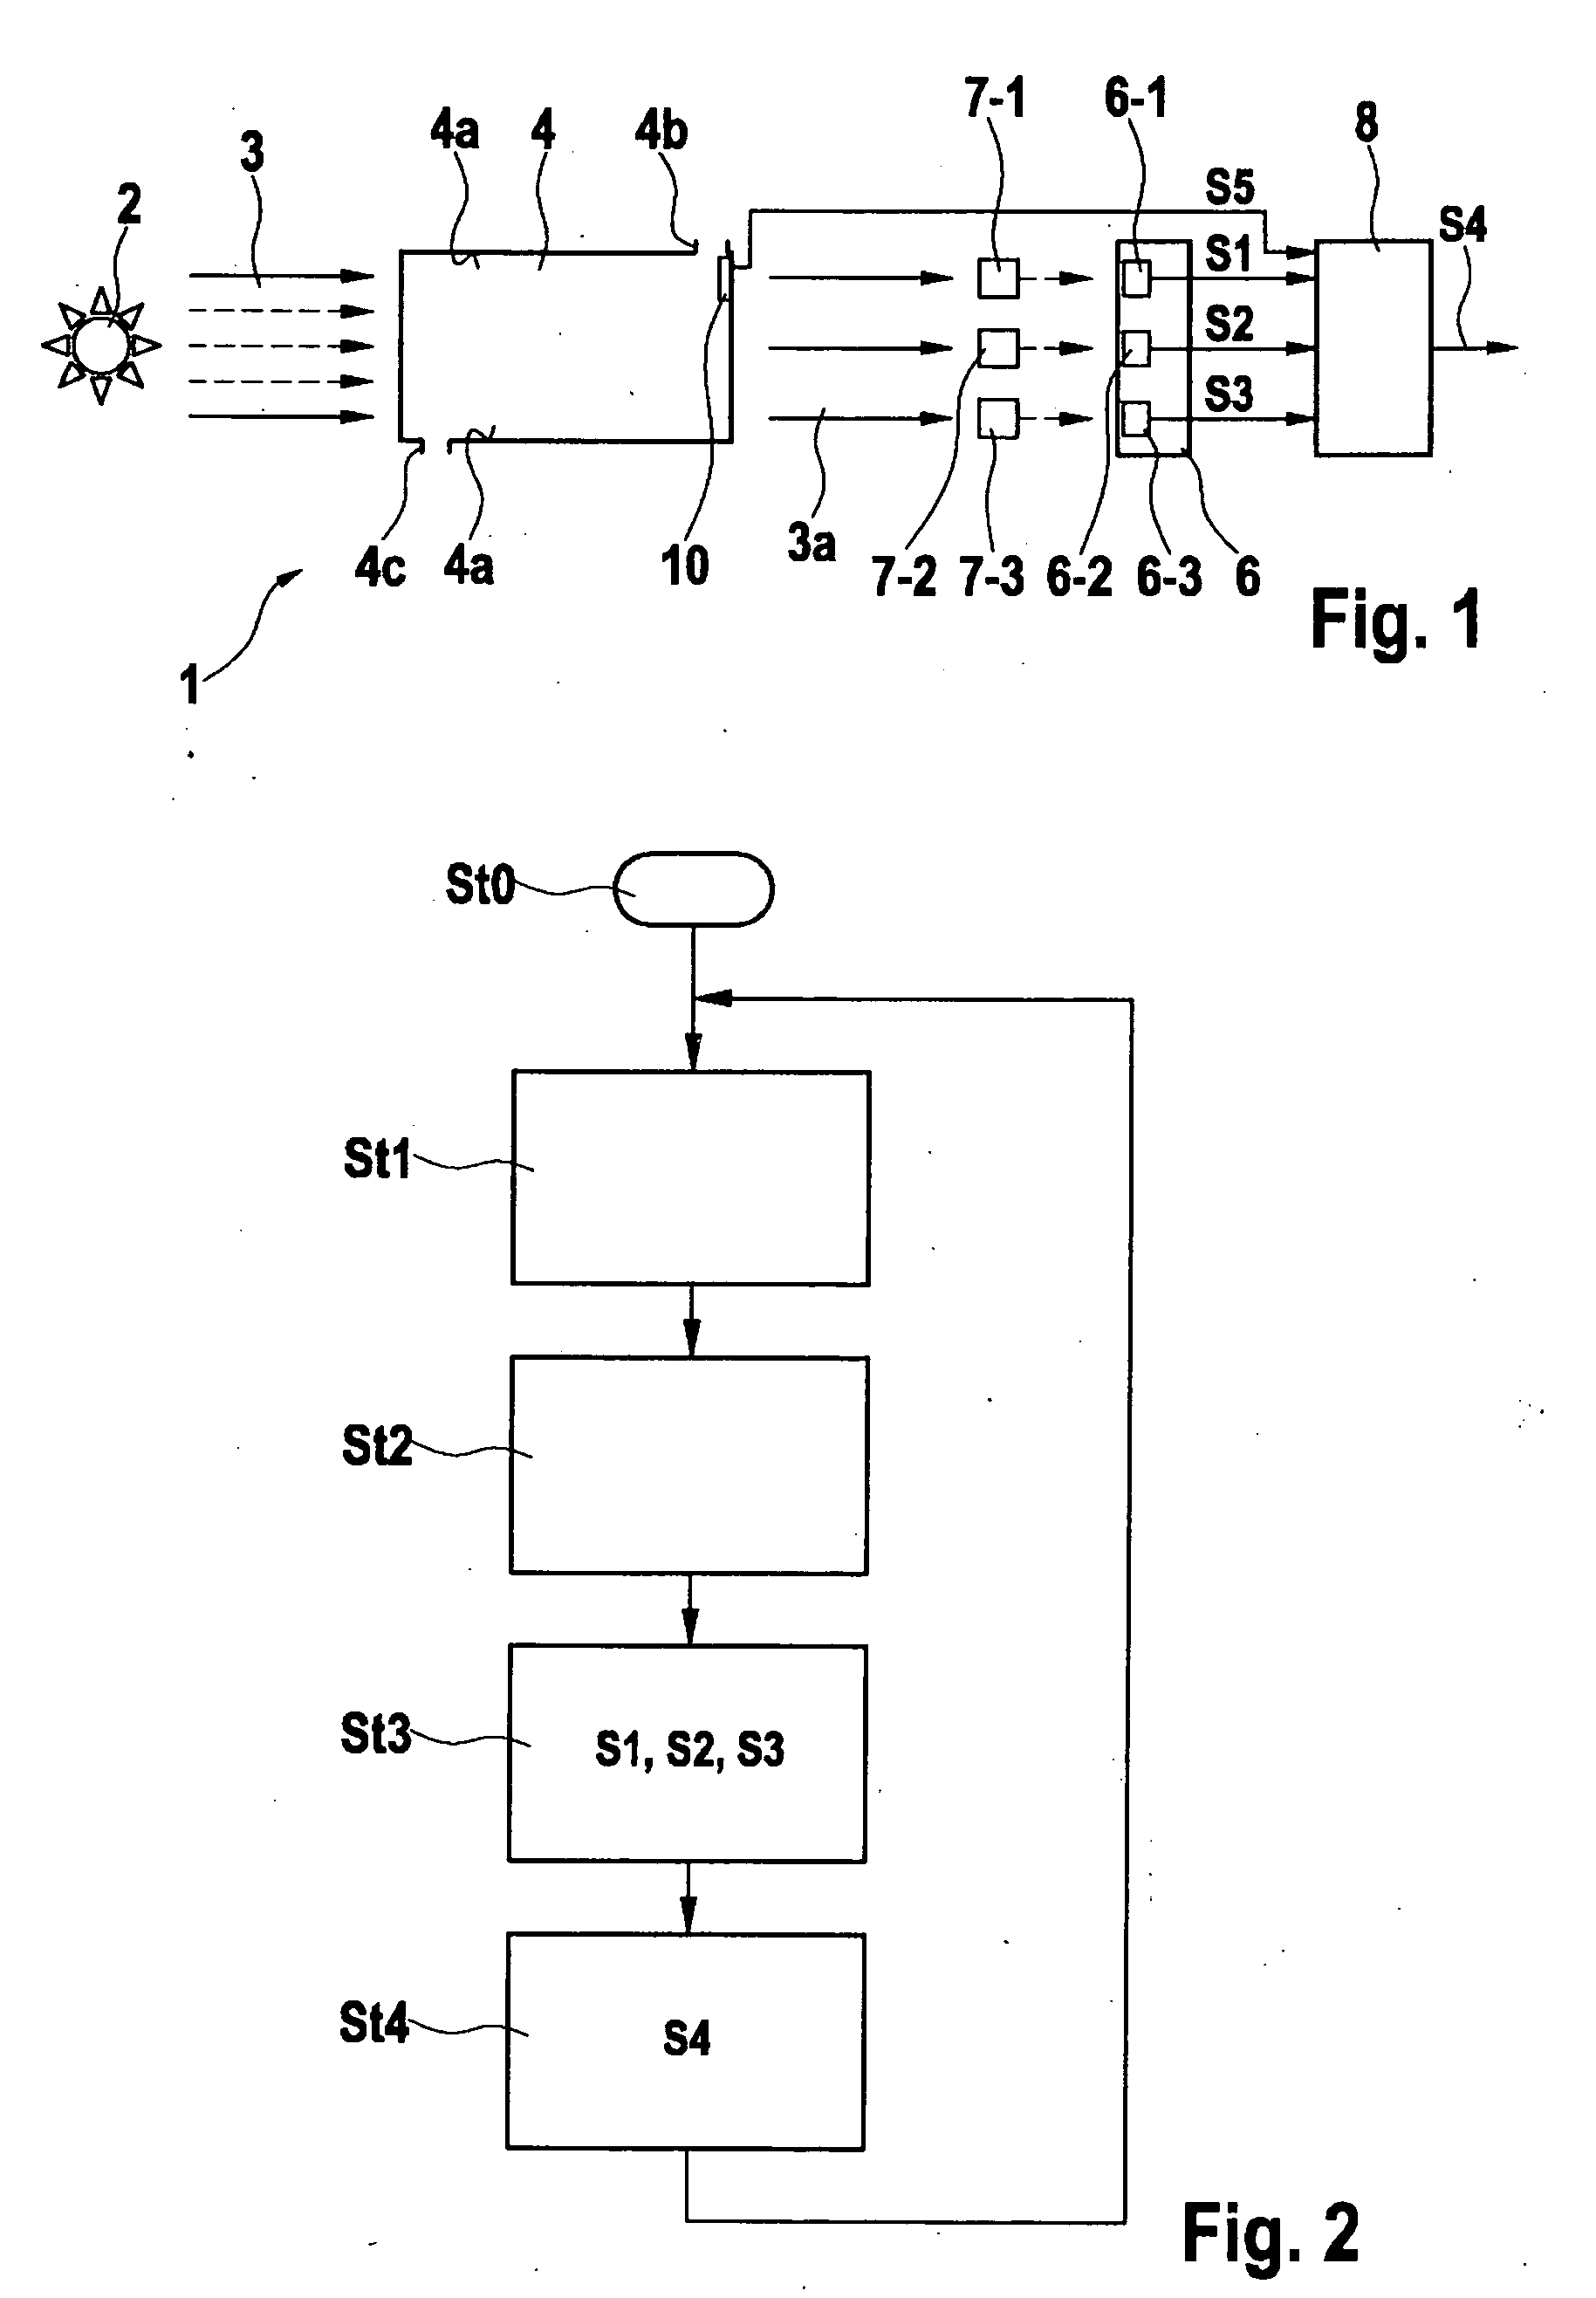 Spectroscopic gas sensor and method for ascertaining an alcohol concentration in a supplied air volume, in particular an exhaled volume